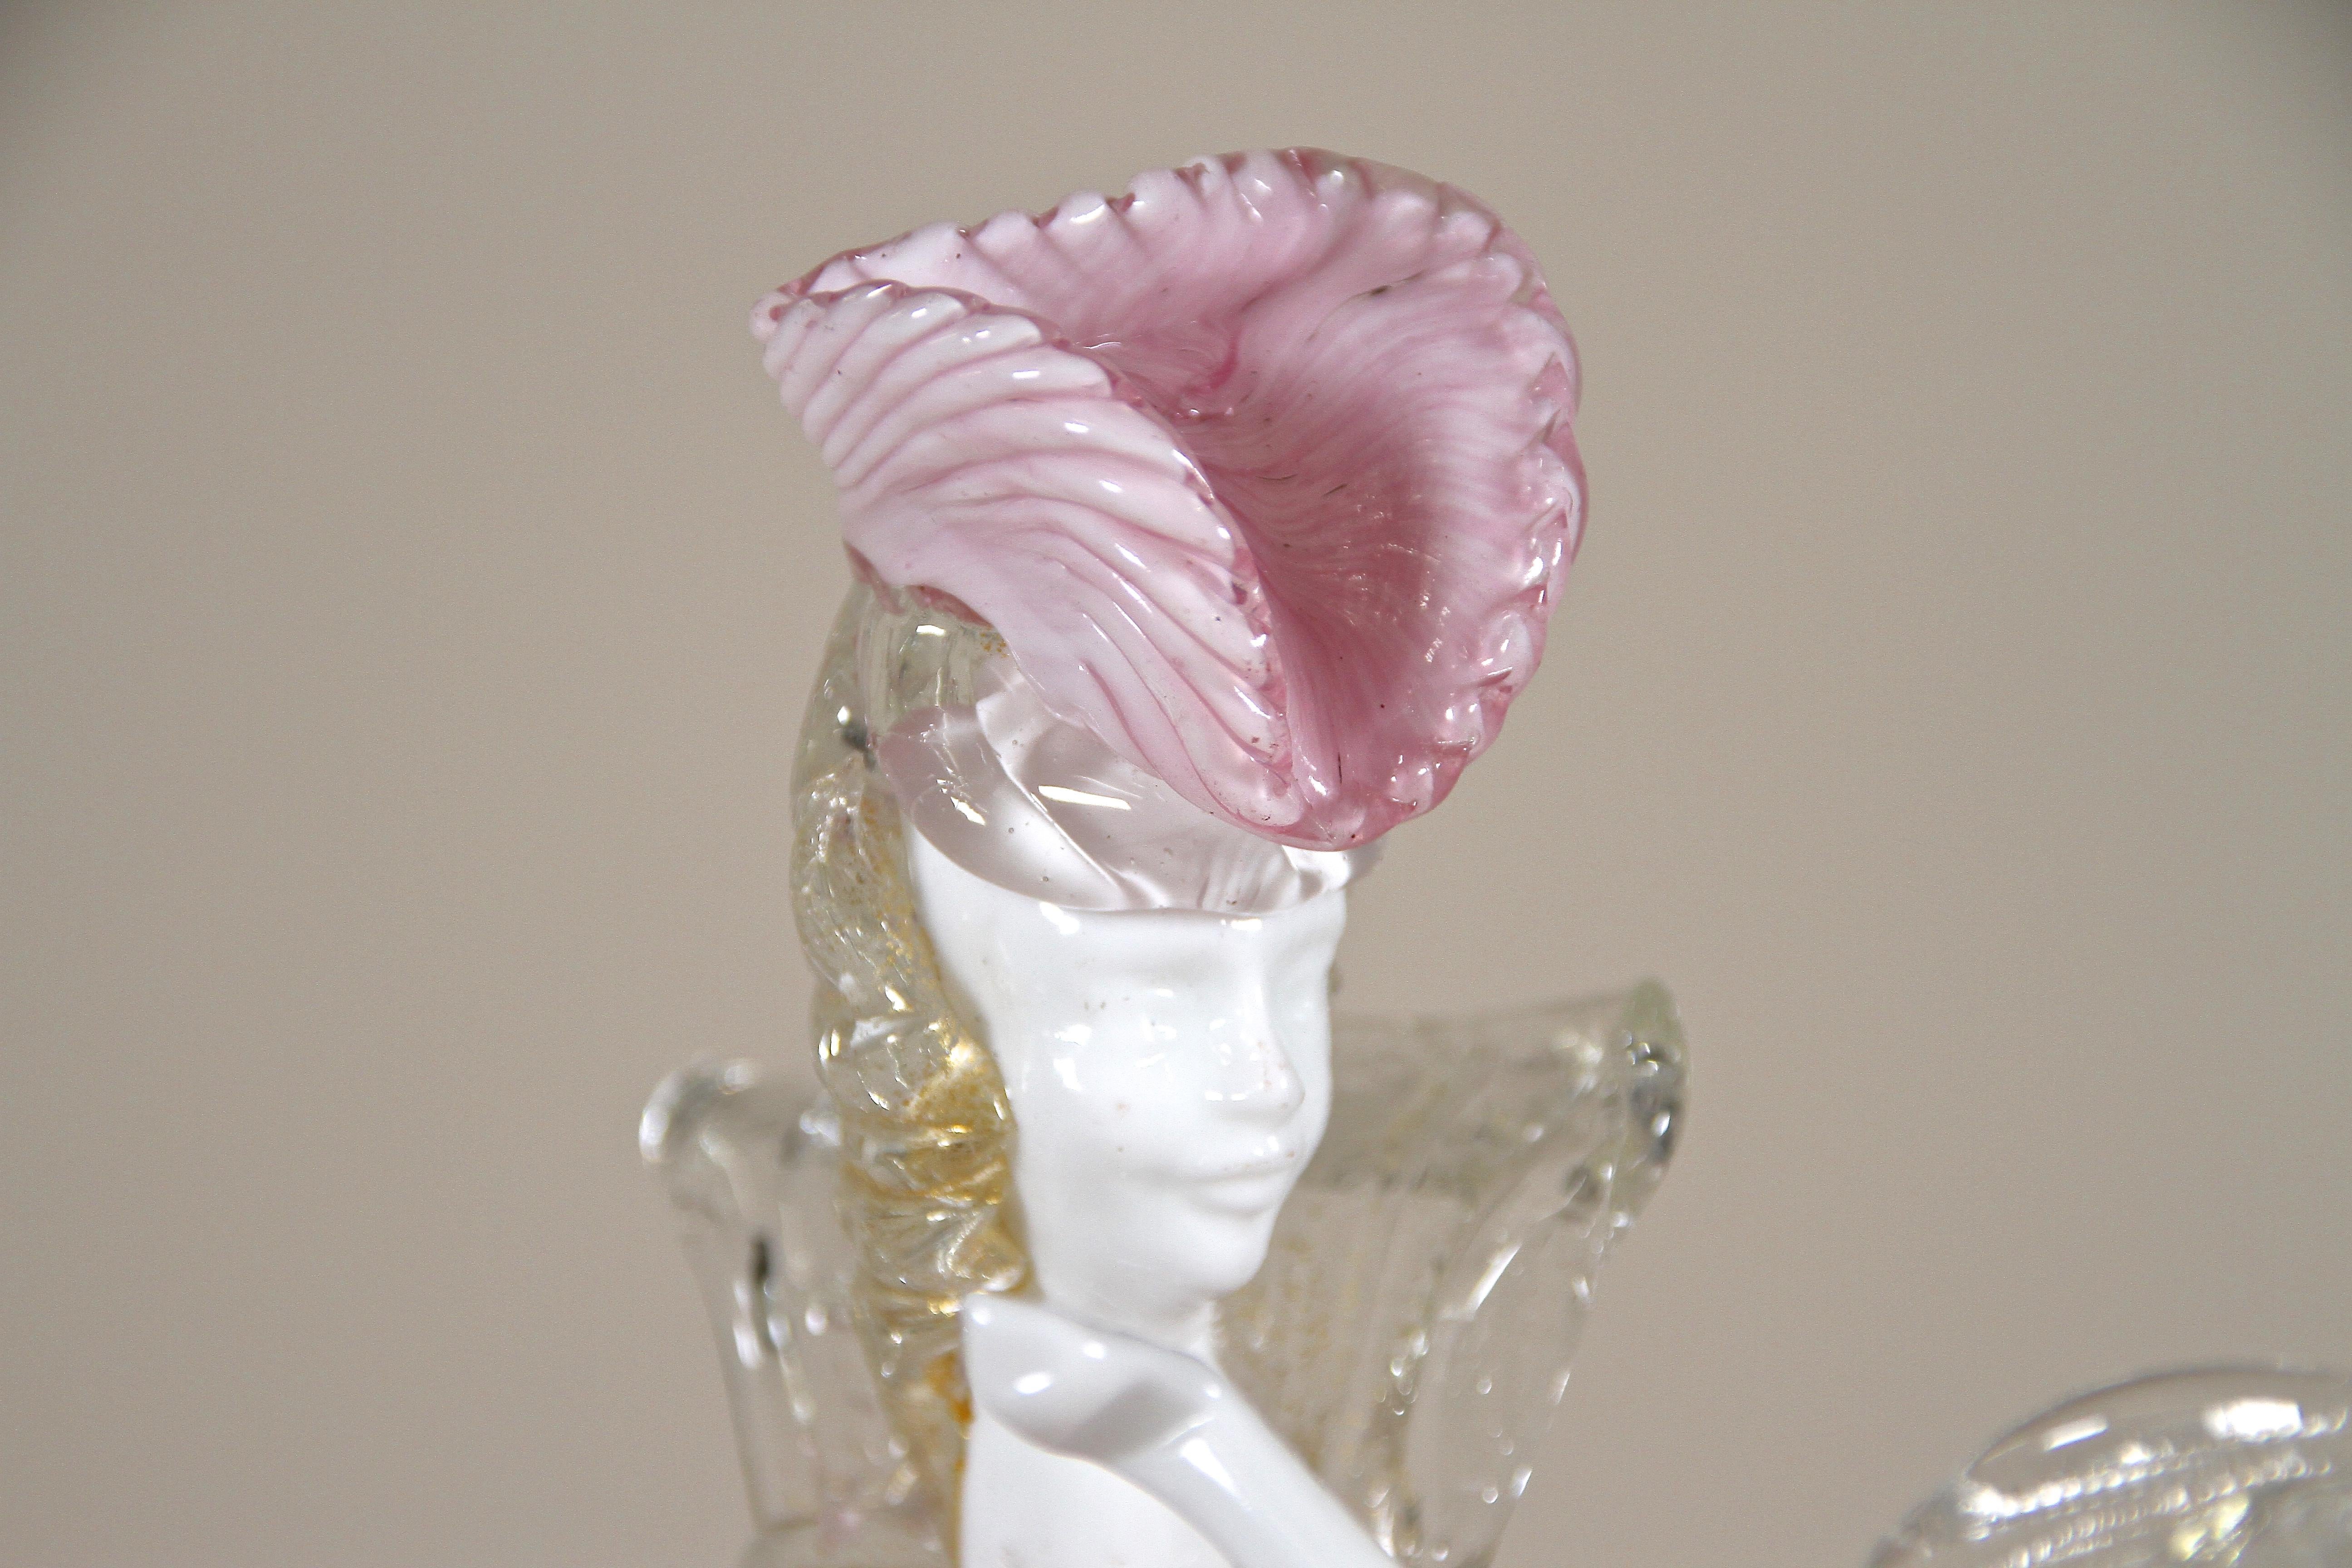 Artfully designed Murano glass figurine out of the famous workshops in Venice from the 1950s. Standing on a golden round base this absolutely fantastic made murano sculpture depicts a beautiful venetian lady dancing in a noble pink/ white robe. The